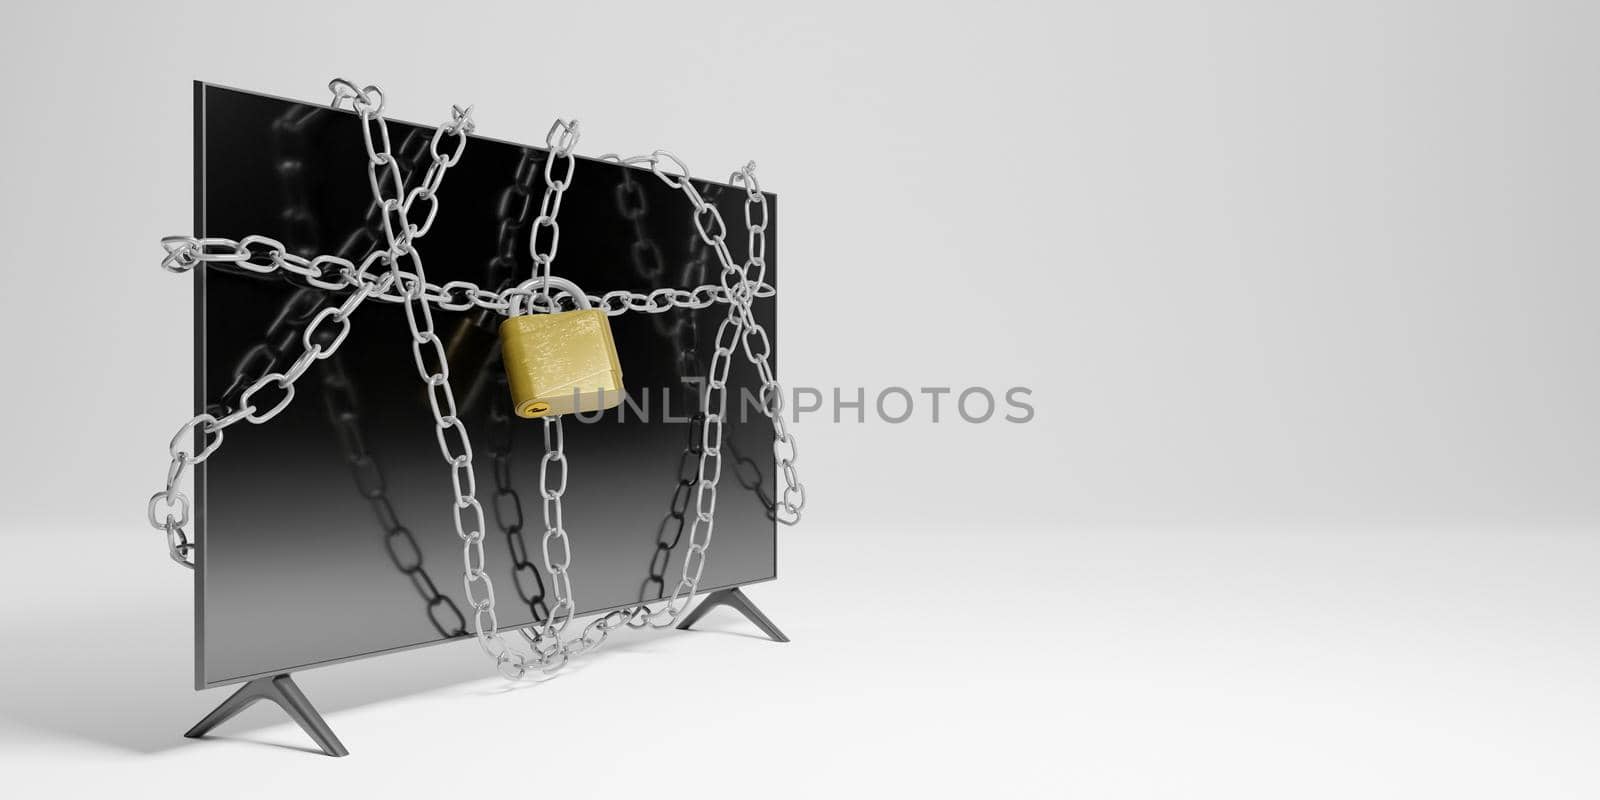 Modern flat television with chains tangled in it and a padlock in front on white background. Parental control concept. 3d rendering